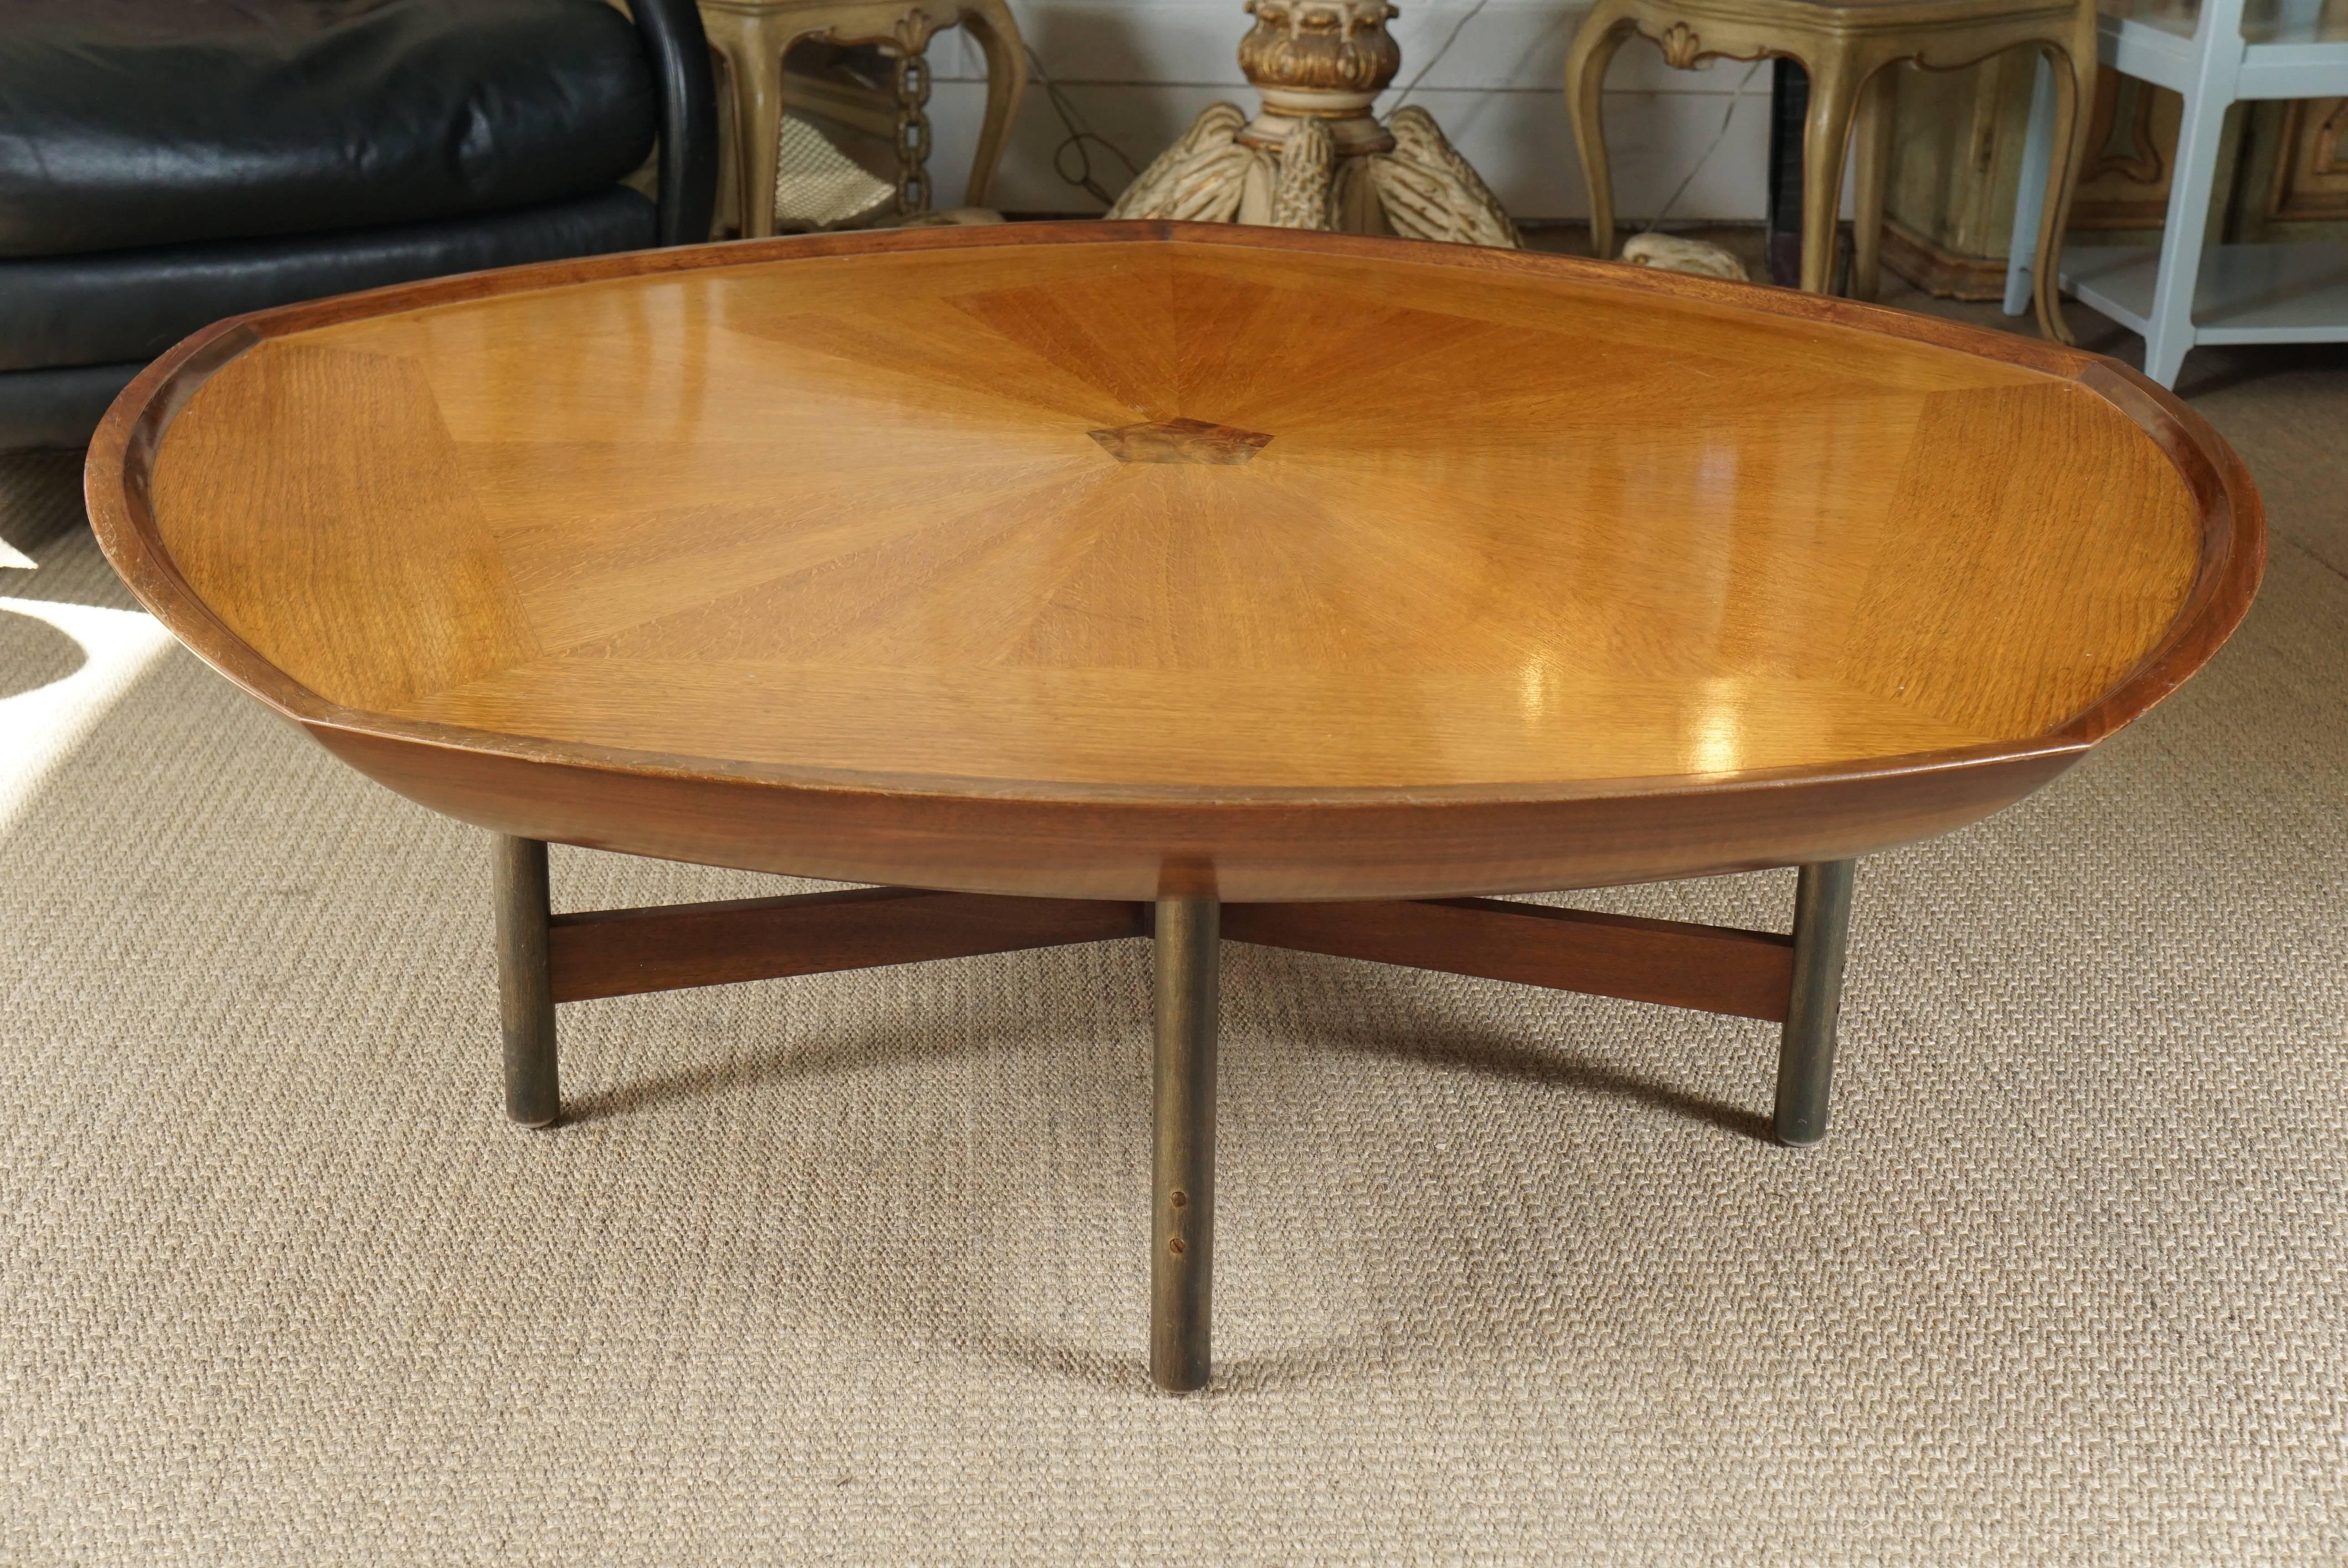 Here is a beautiful walnut top coffee table with a centre medallion by Baker Signature. The table has been customized on the base with the addition of the steel legs that surround the stretcher frame which is also in walnut. Modern and elegant, the